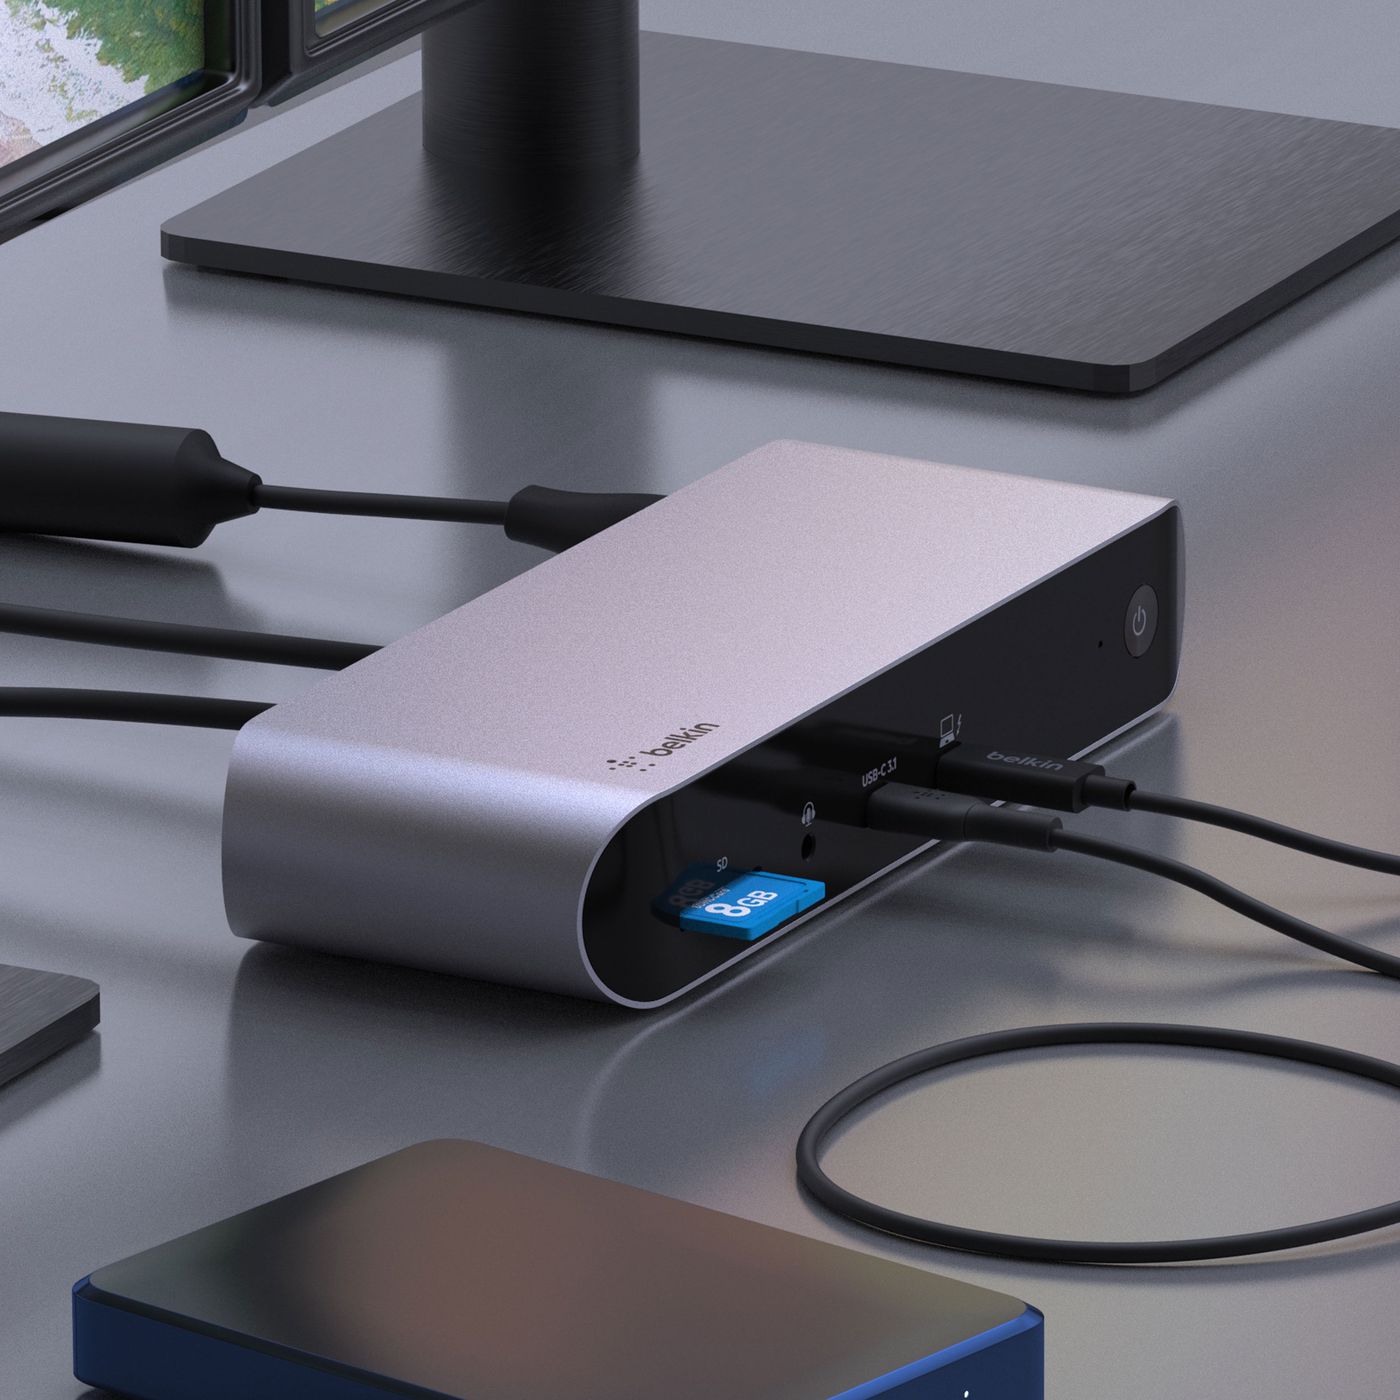 Belkin's new $400 Thunderbolt 4 dock is here to solve your dongle 